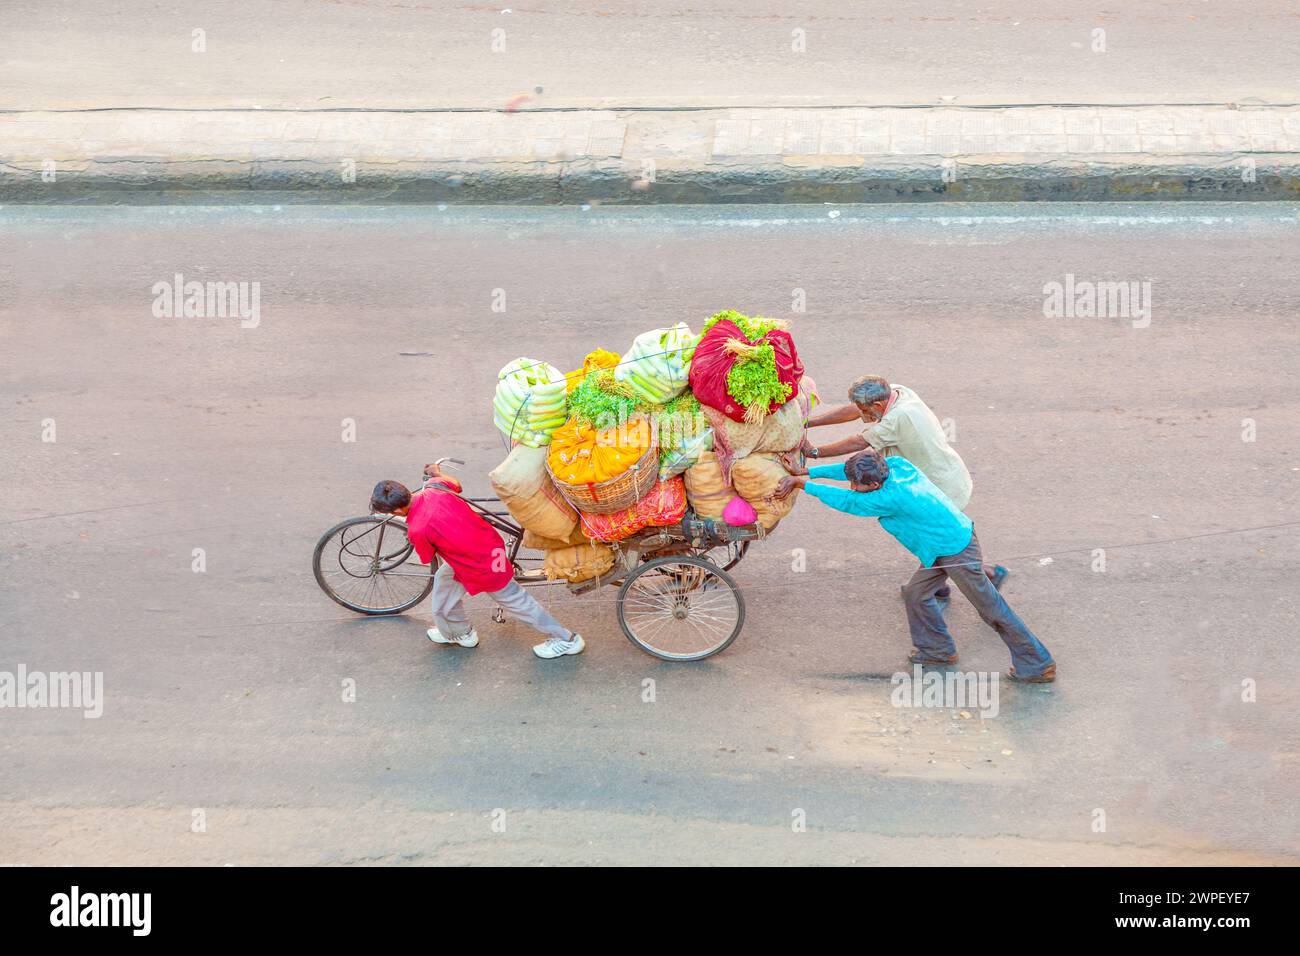 JAIPUR, INDIA - NOV 13, 2011: farmer carry their vegetables in a rickshaw and pull the cart along the main street with the whole family. Stock Photo